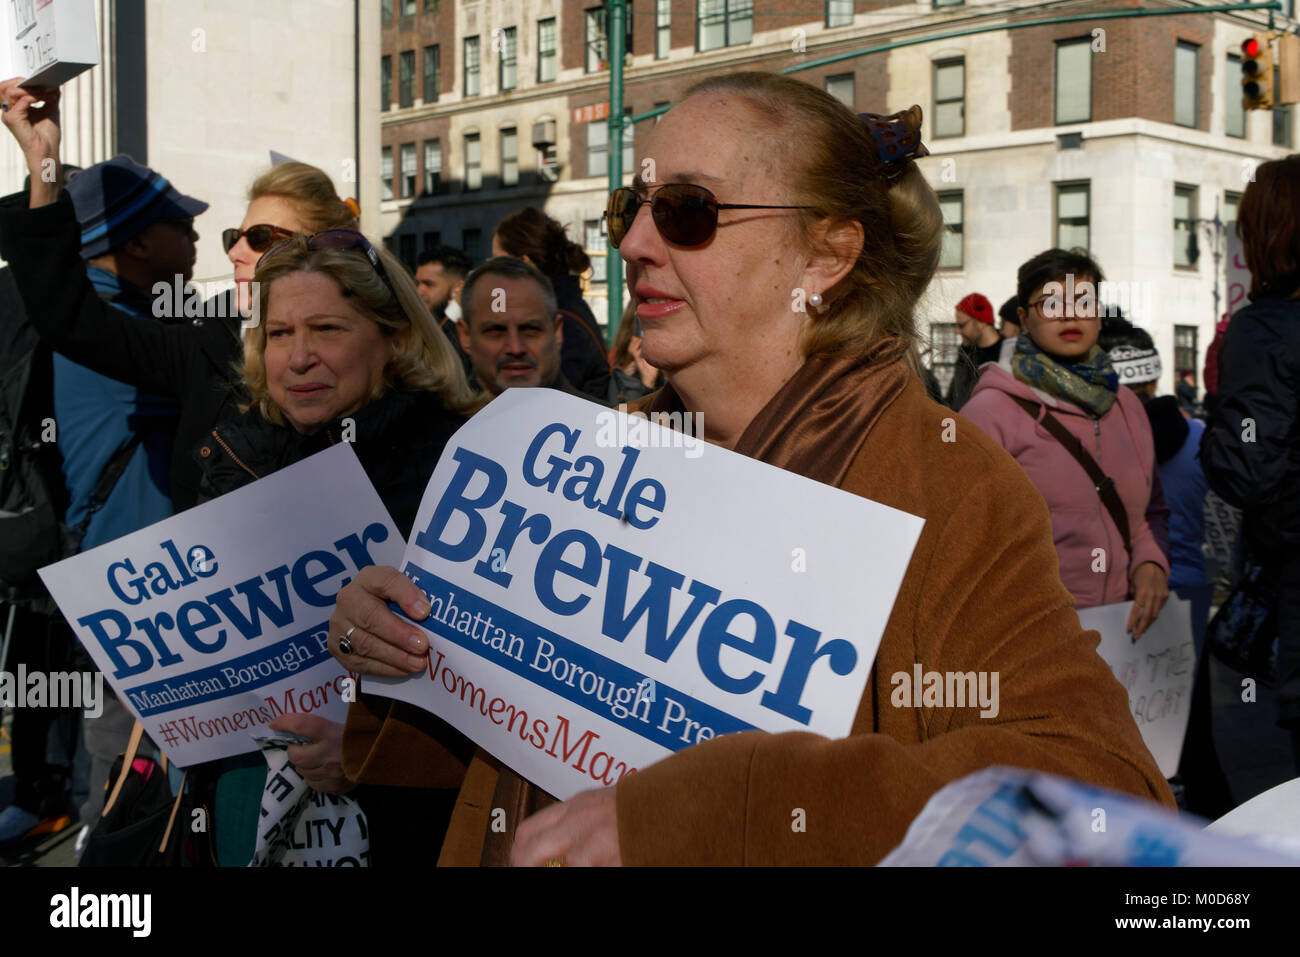 New York, NY, USA, 20 Jan., 2018: Manhattan Borough President Gale A. Brewer was among an estimated 120,000 people, mostly women, who marched through Manhattan to protest Trump’s presidency and the policies of the Republican-controlled Congress. (© Terese Loeb Kreuzer/Alamy) Stock Photo